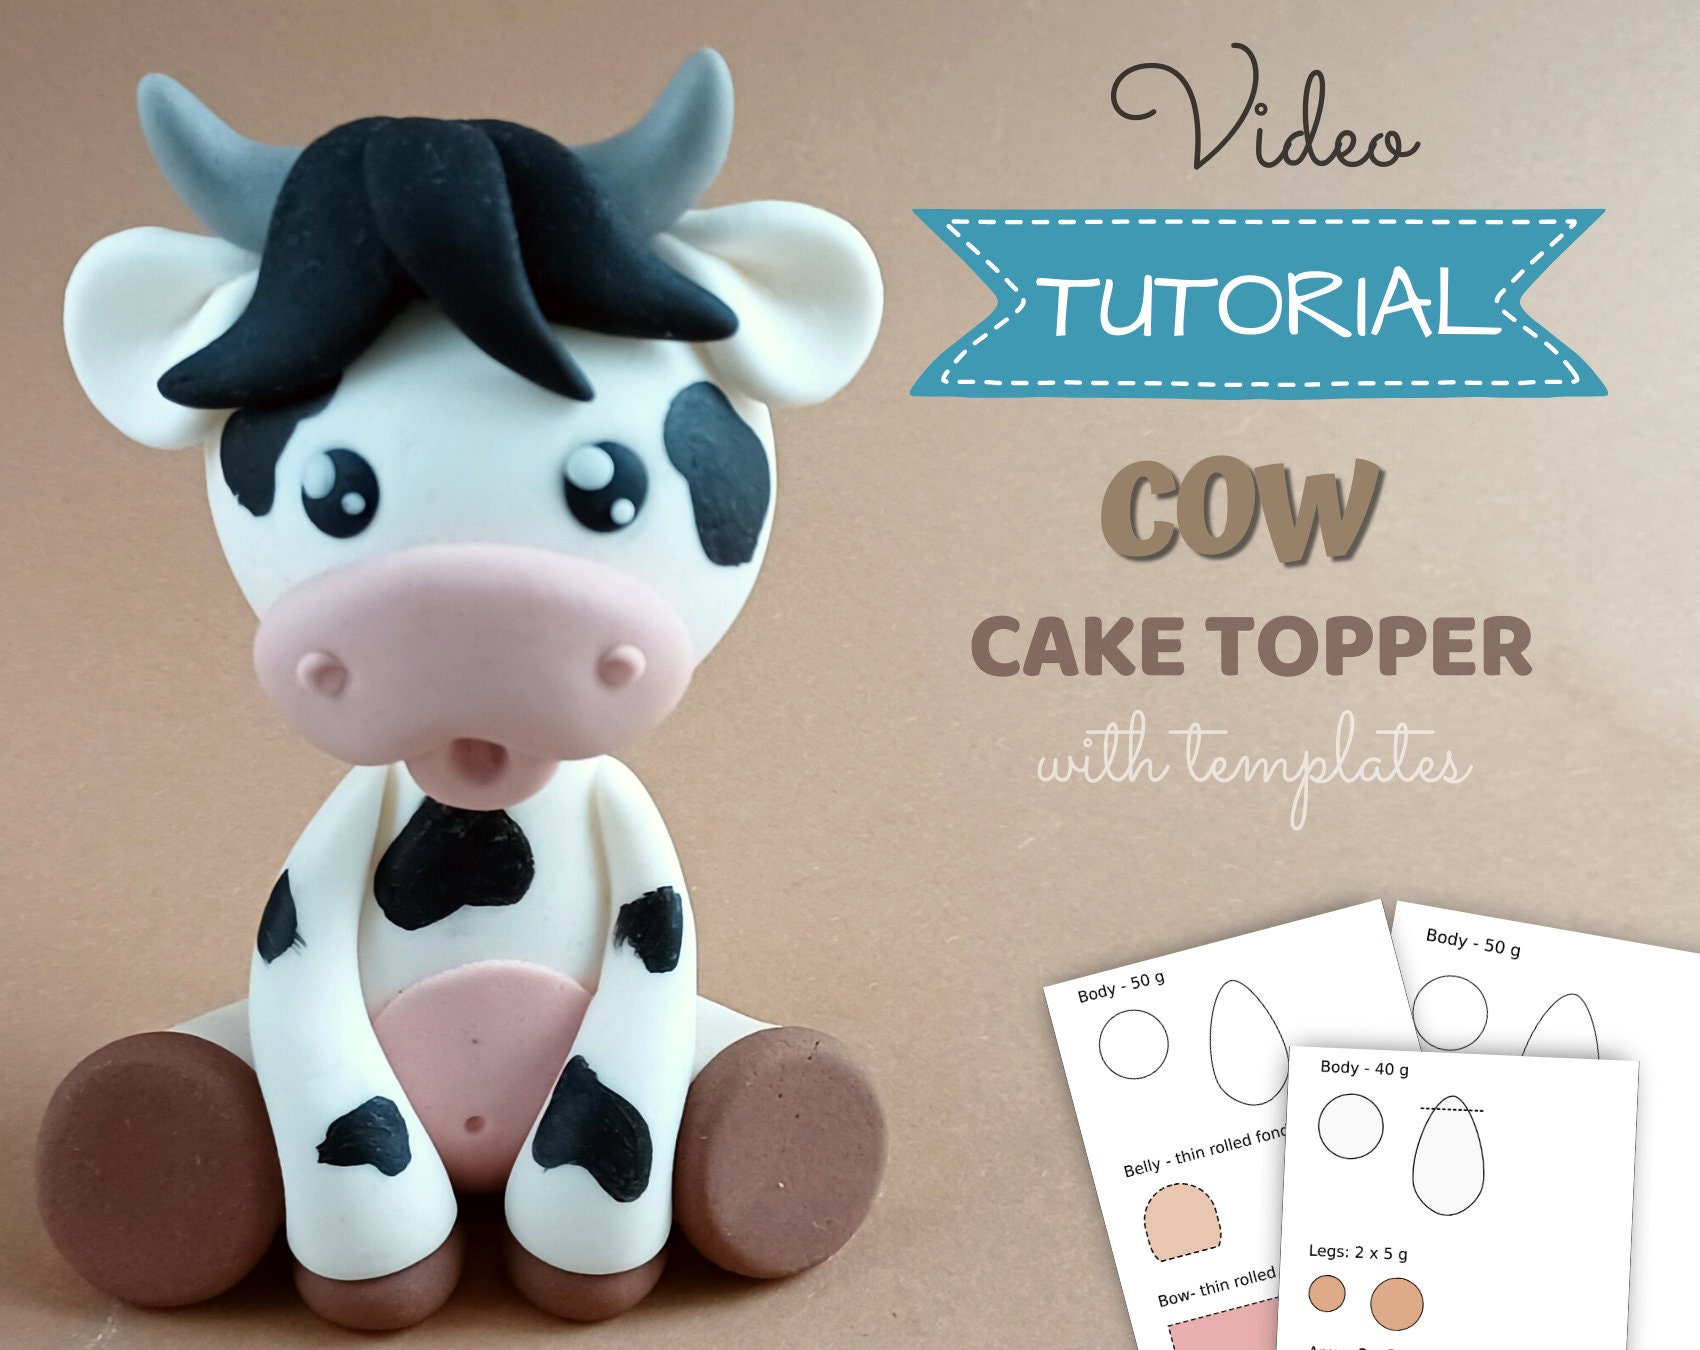 Cow Cake Topper VIDEO Tutorial With Templates boy 